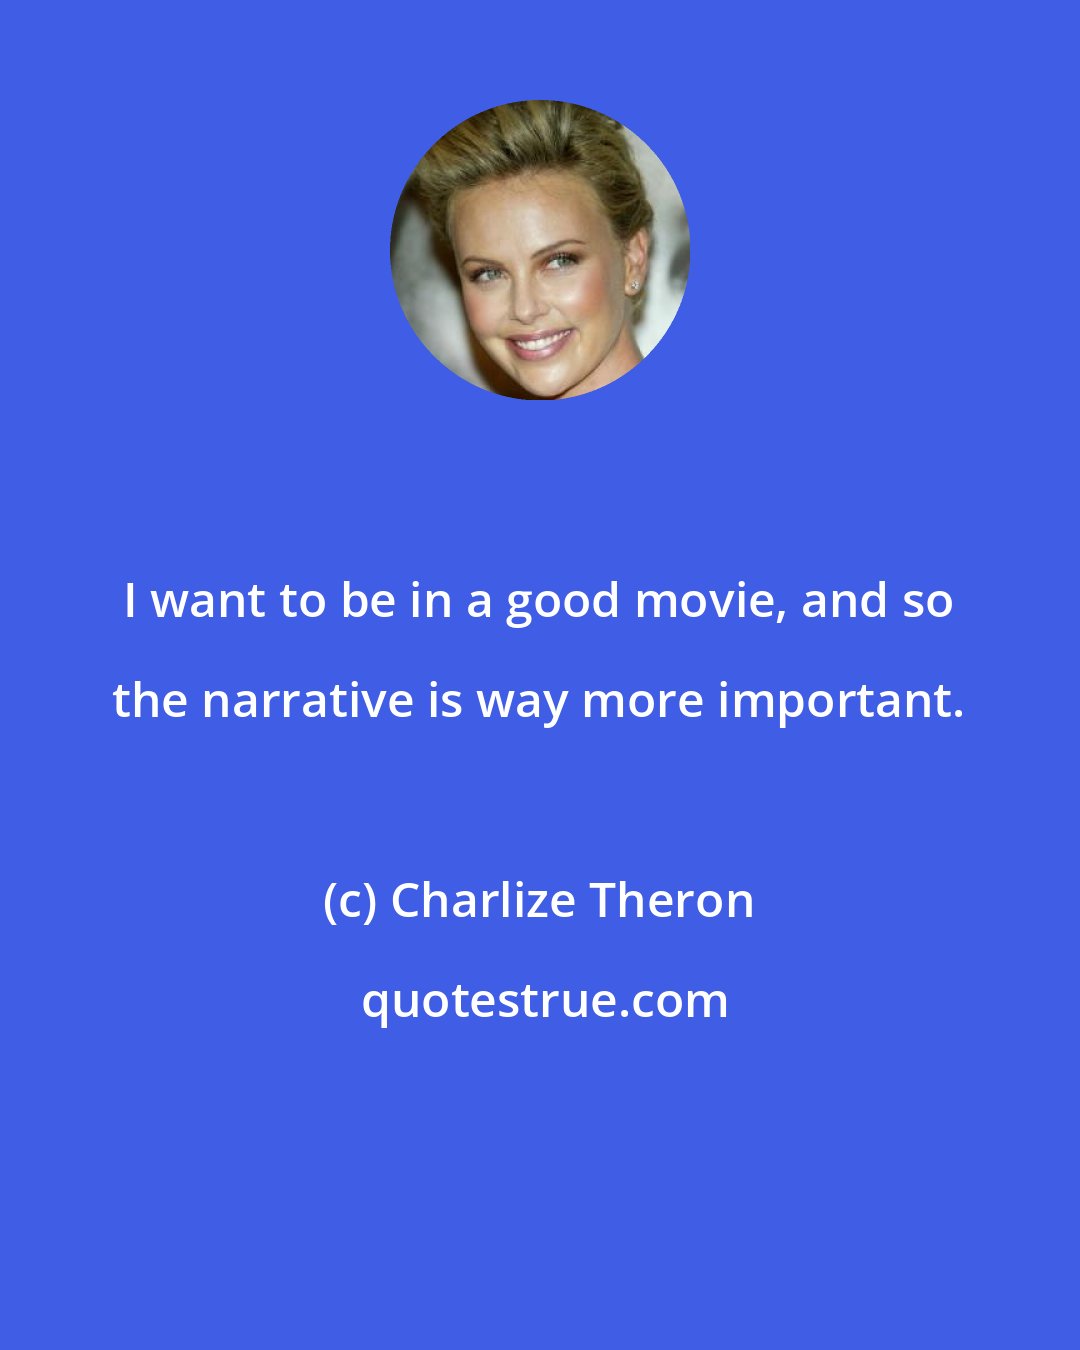 Charlize Theron: I want to be in a good movie, and so the narrative is way more important.